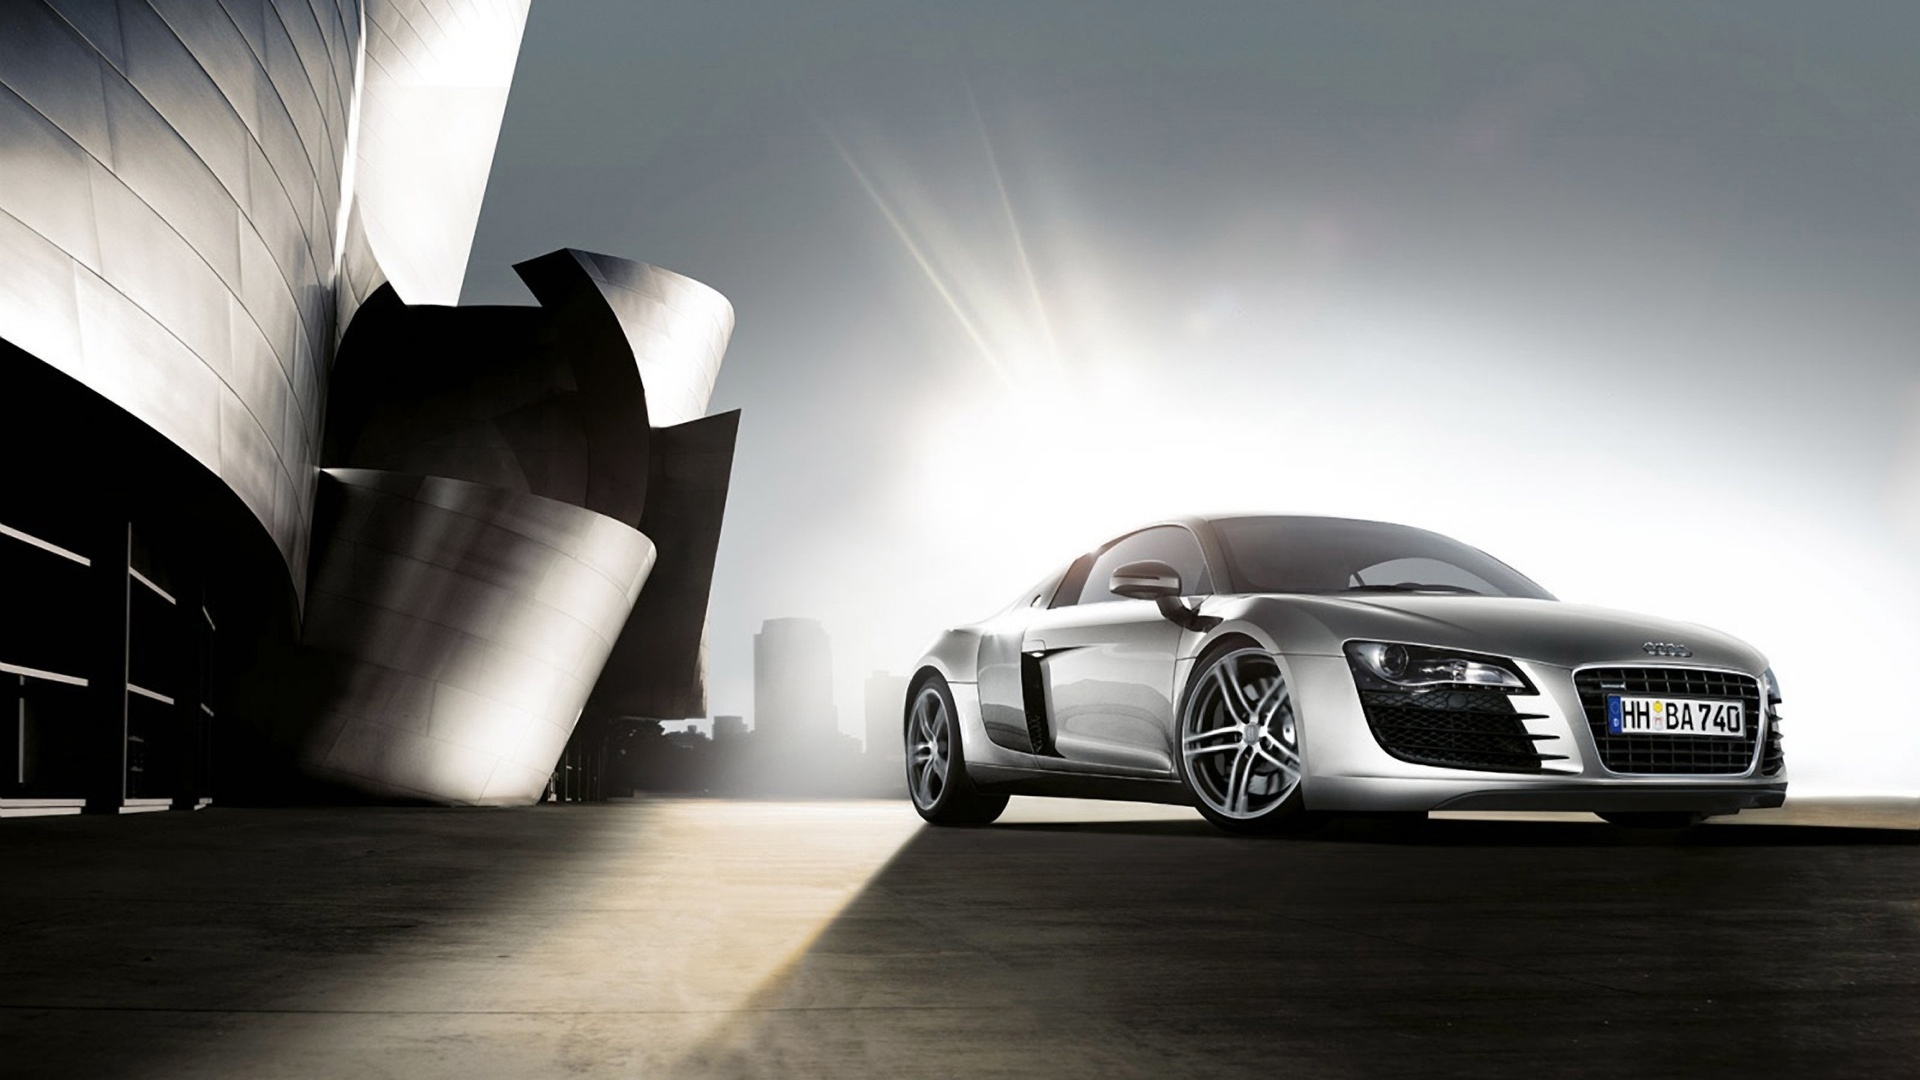 Audi R8 Front Angle for 1920 x 1080 HDTV 1080p resolution